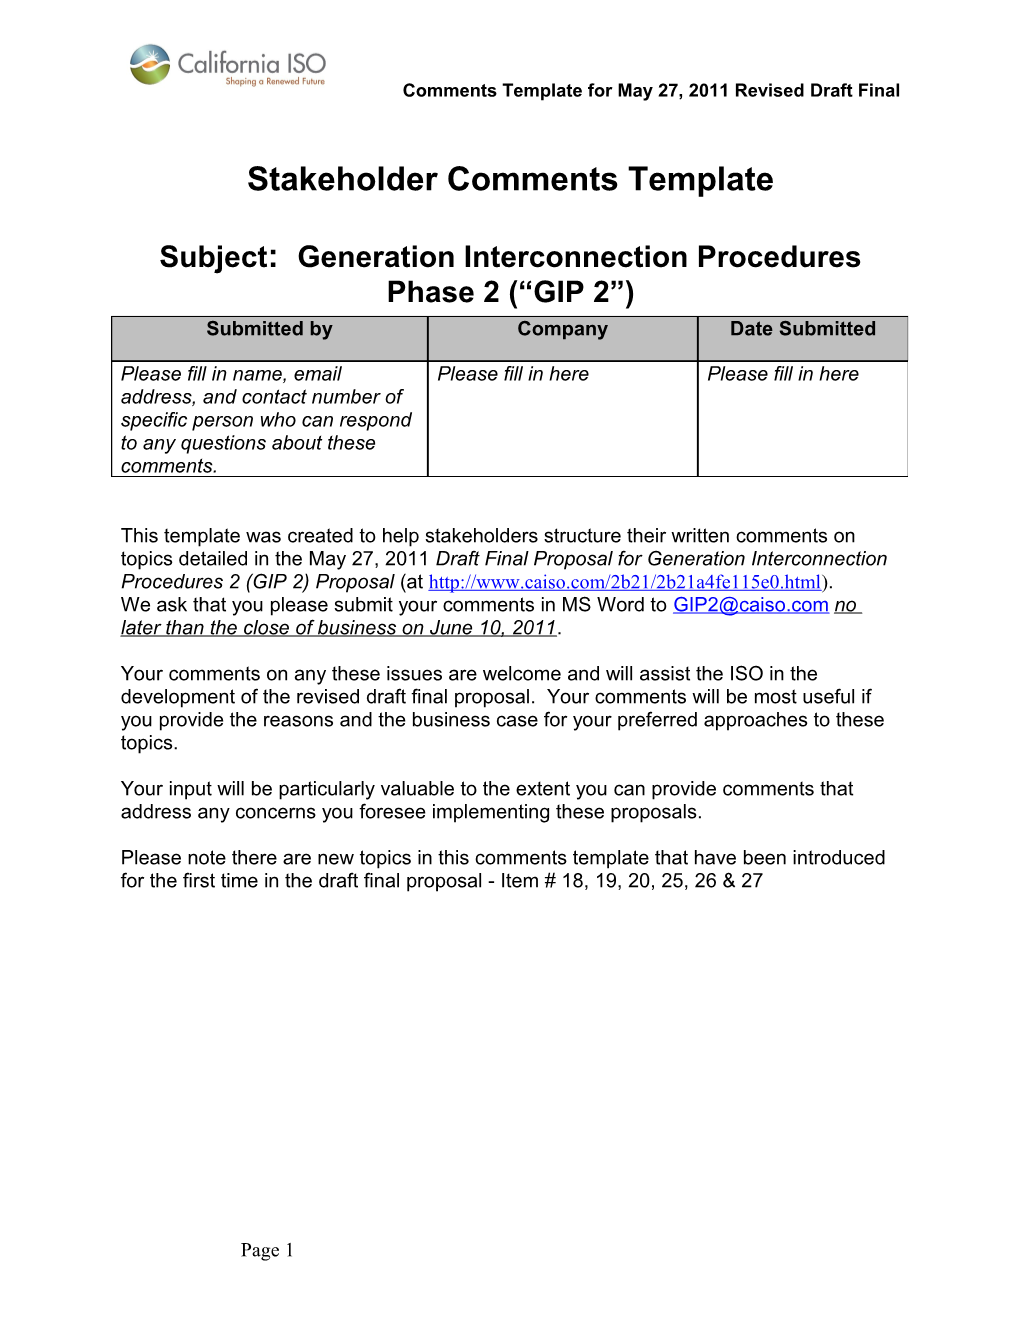 Stakeholder Comments Template - Generation Interconnection Procedures Phase 2 Revised Draft